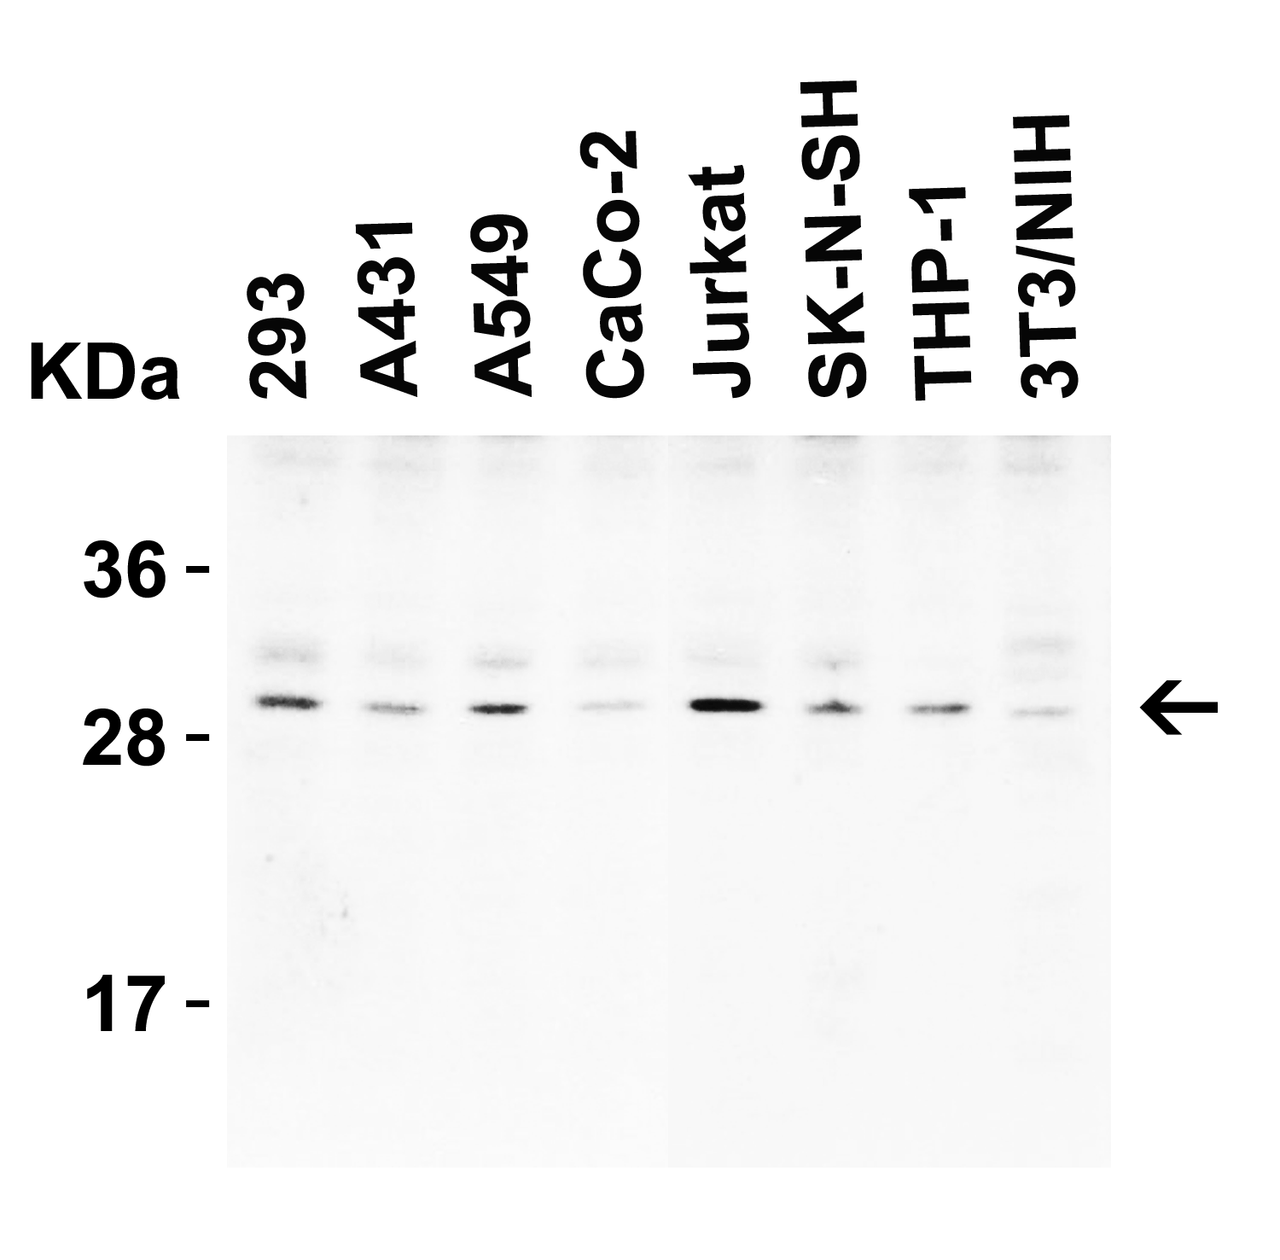 Figure 1 Western Blot Validation in Human and Mouse Cell Lines
Loading: 15 &#956;g of lysates per lane.
Antibodies: CTRP3, 3565 (1 &#956;g/mL) , 1h incubation at RT in 5% NFDM/TBST.
Secondary: Goat anti-rabbit IgG HRP conjugate at 1:10000 dilution.